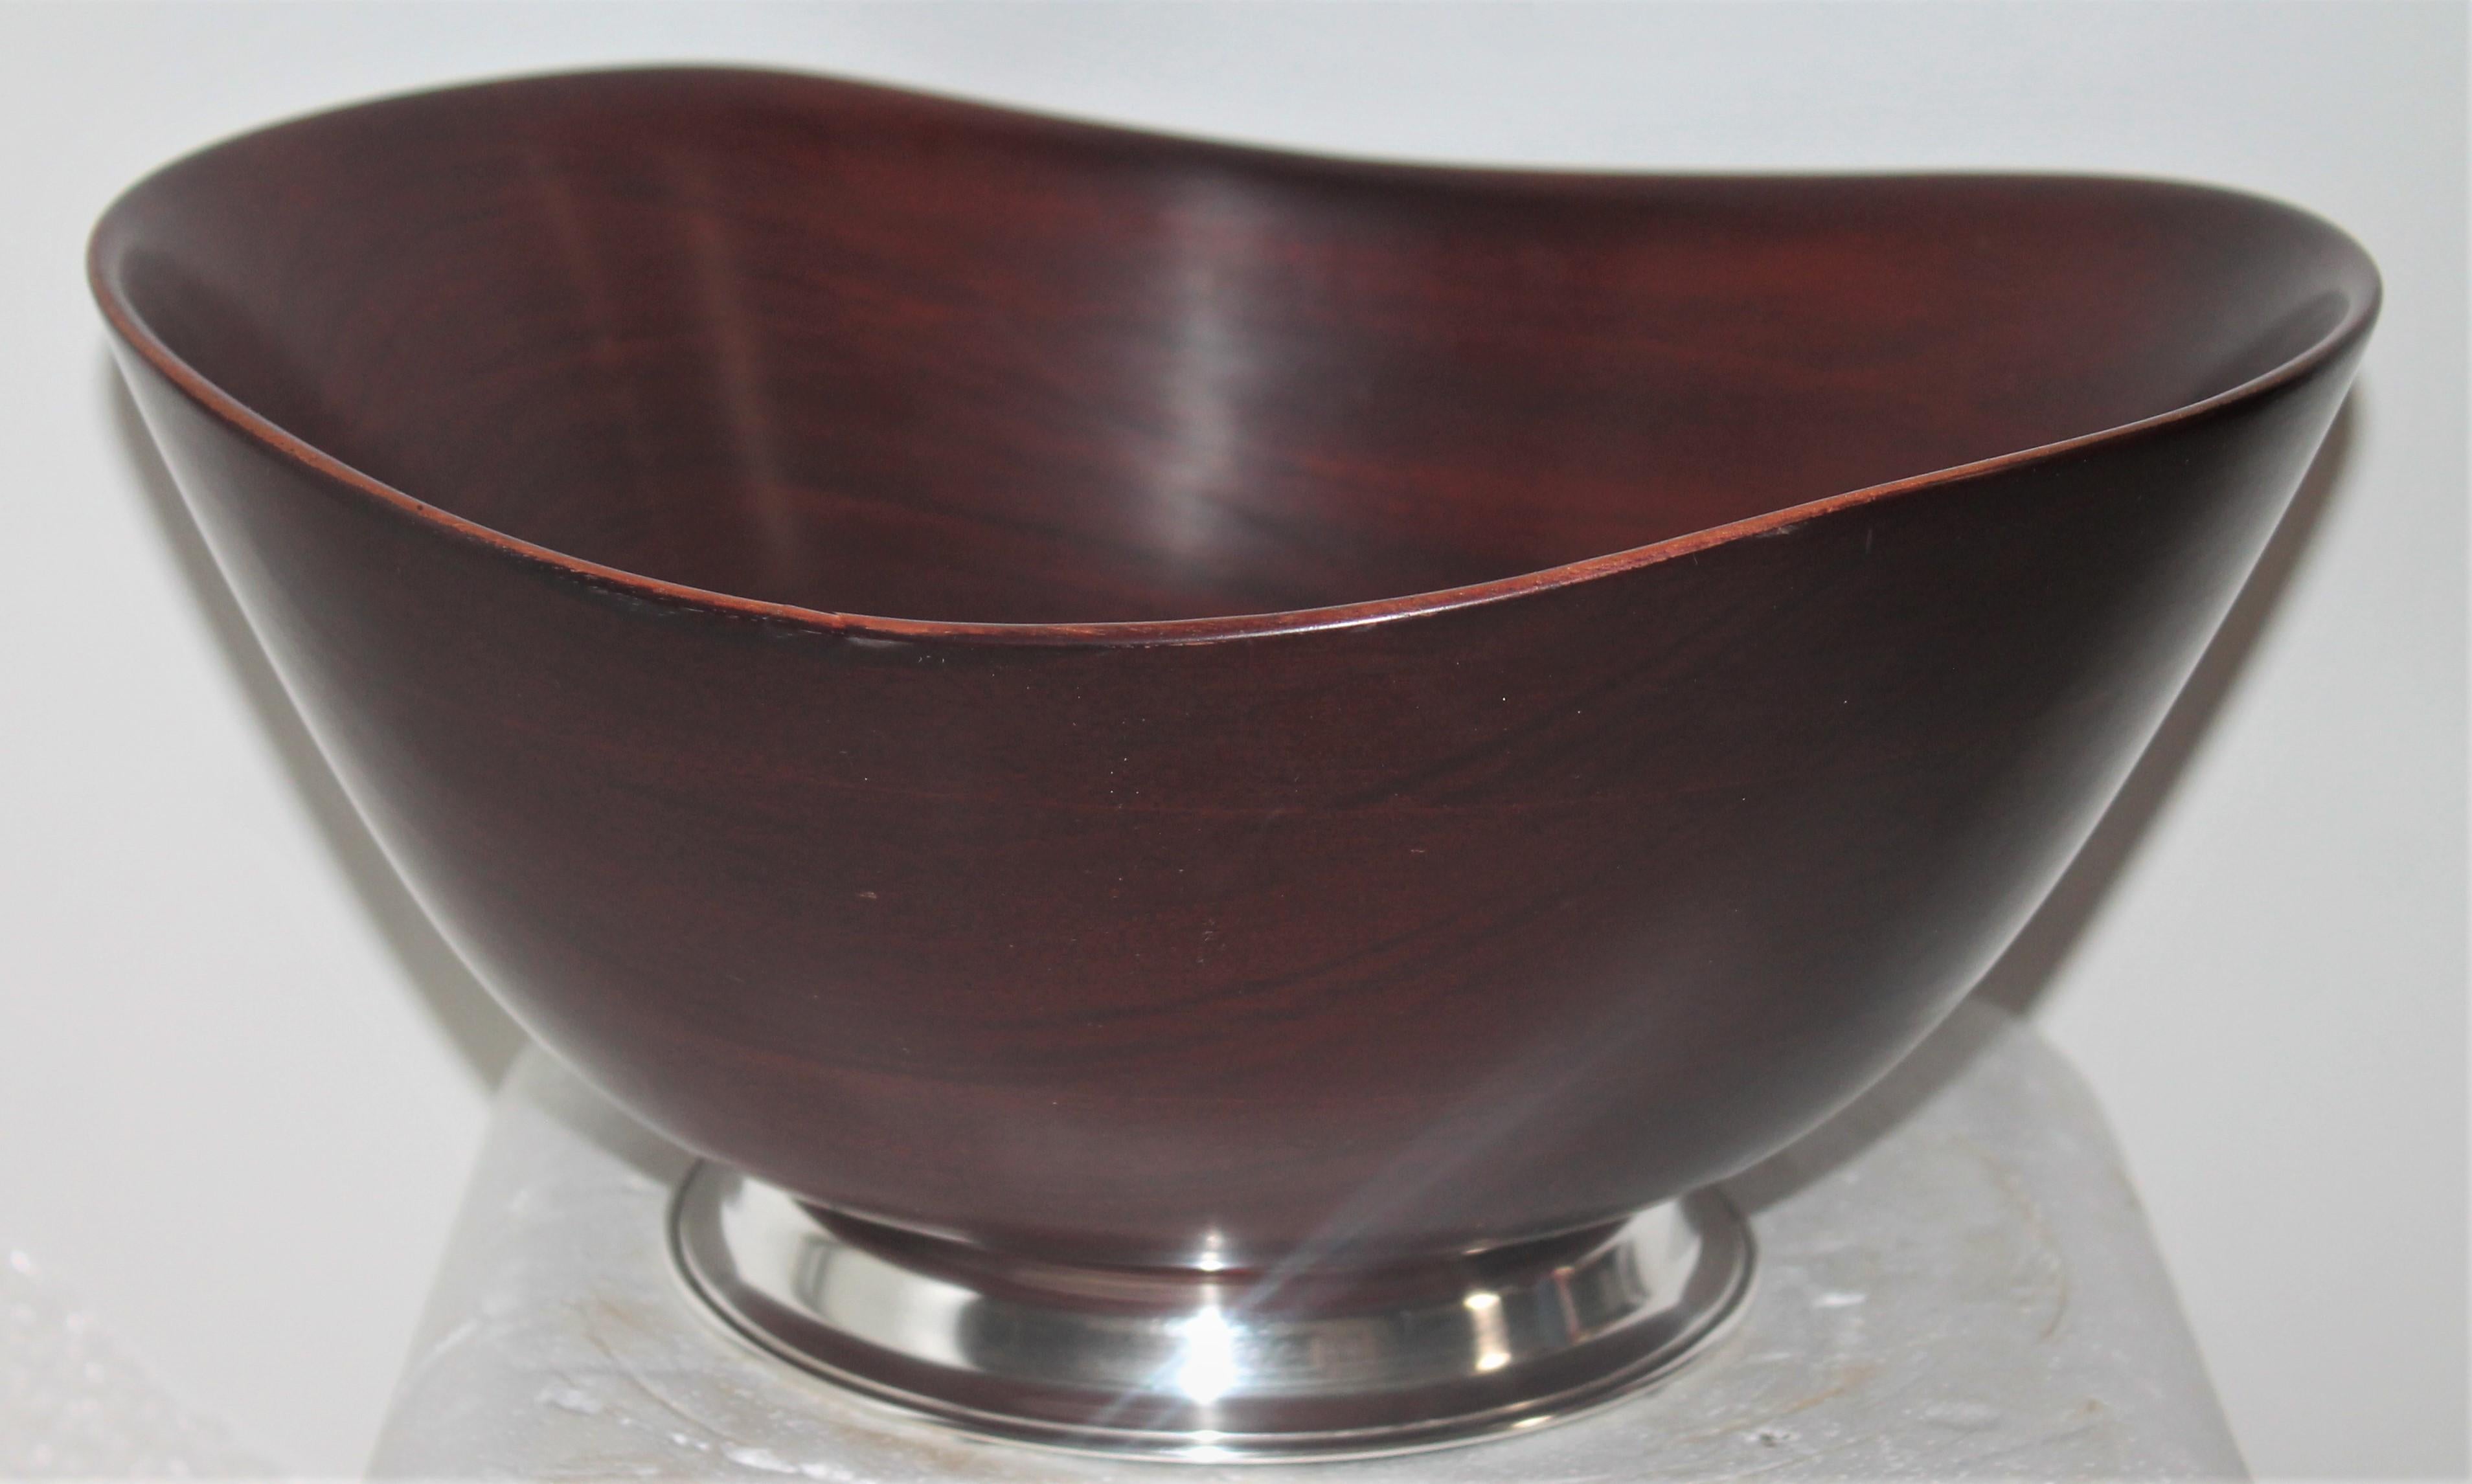 Large salad bowl with sterling silver base signed sterling. This midcentury mahogany salad bowl is in fine condition with a nice heavy sturdy base.